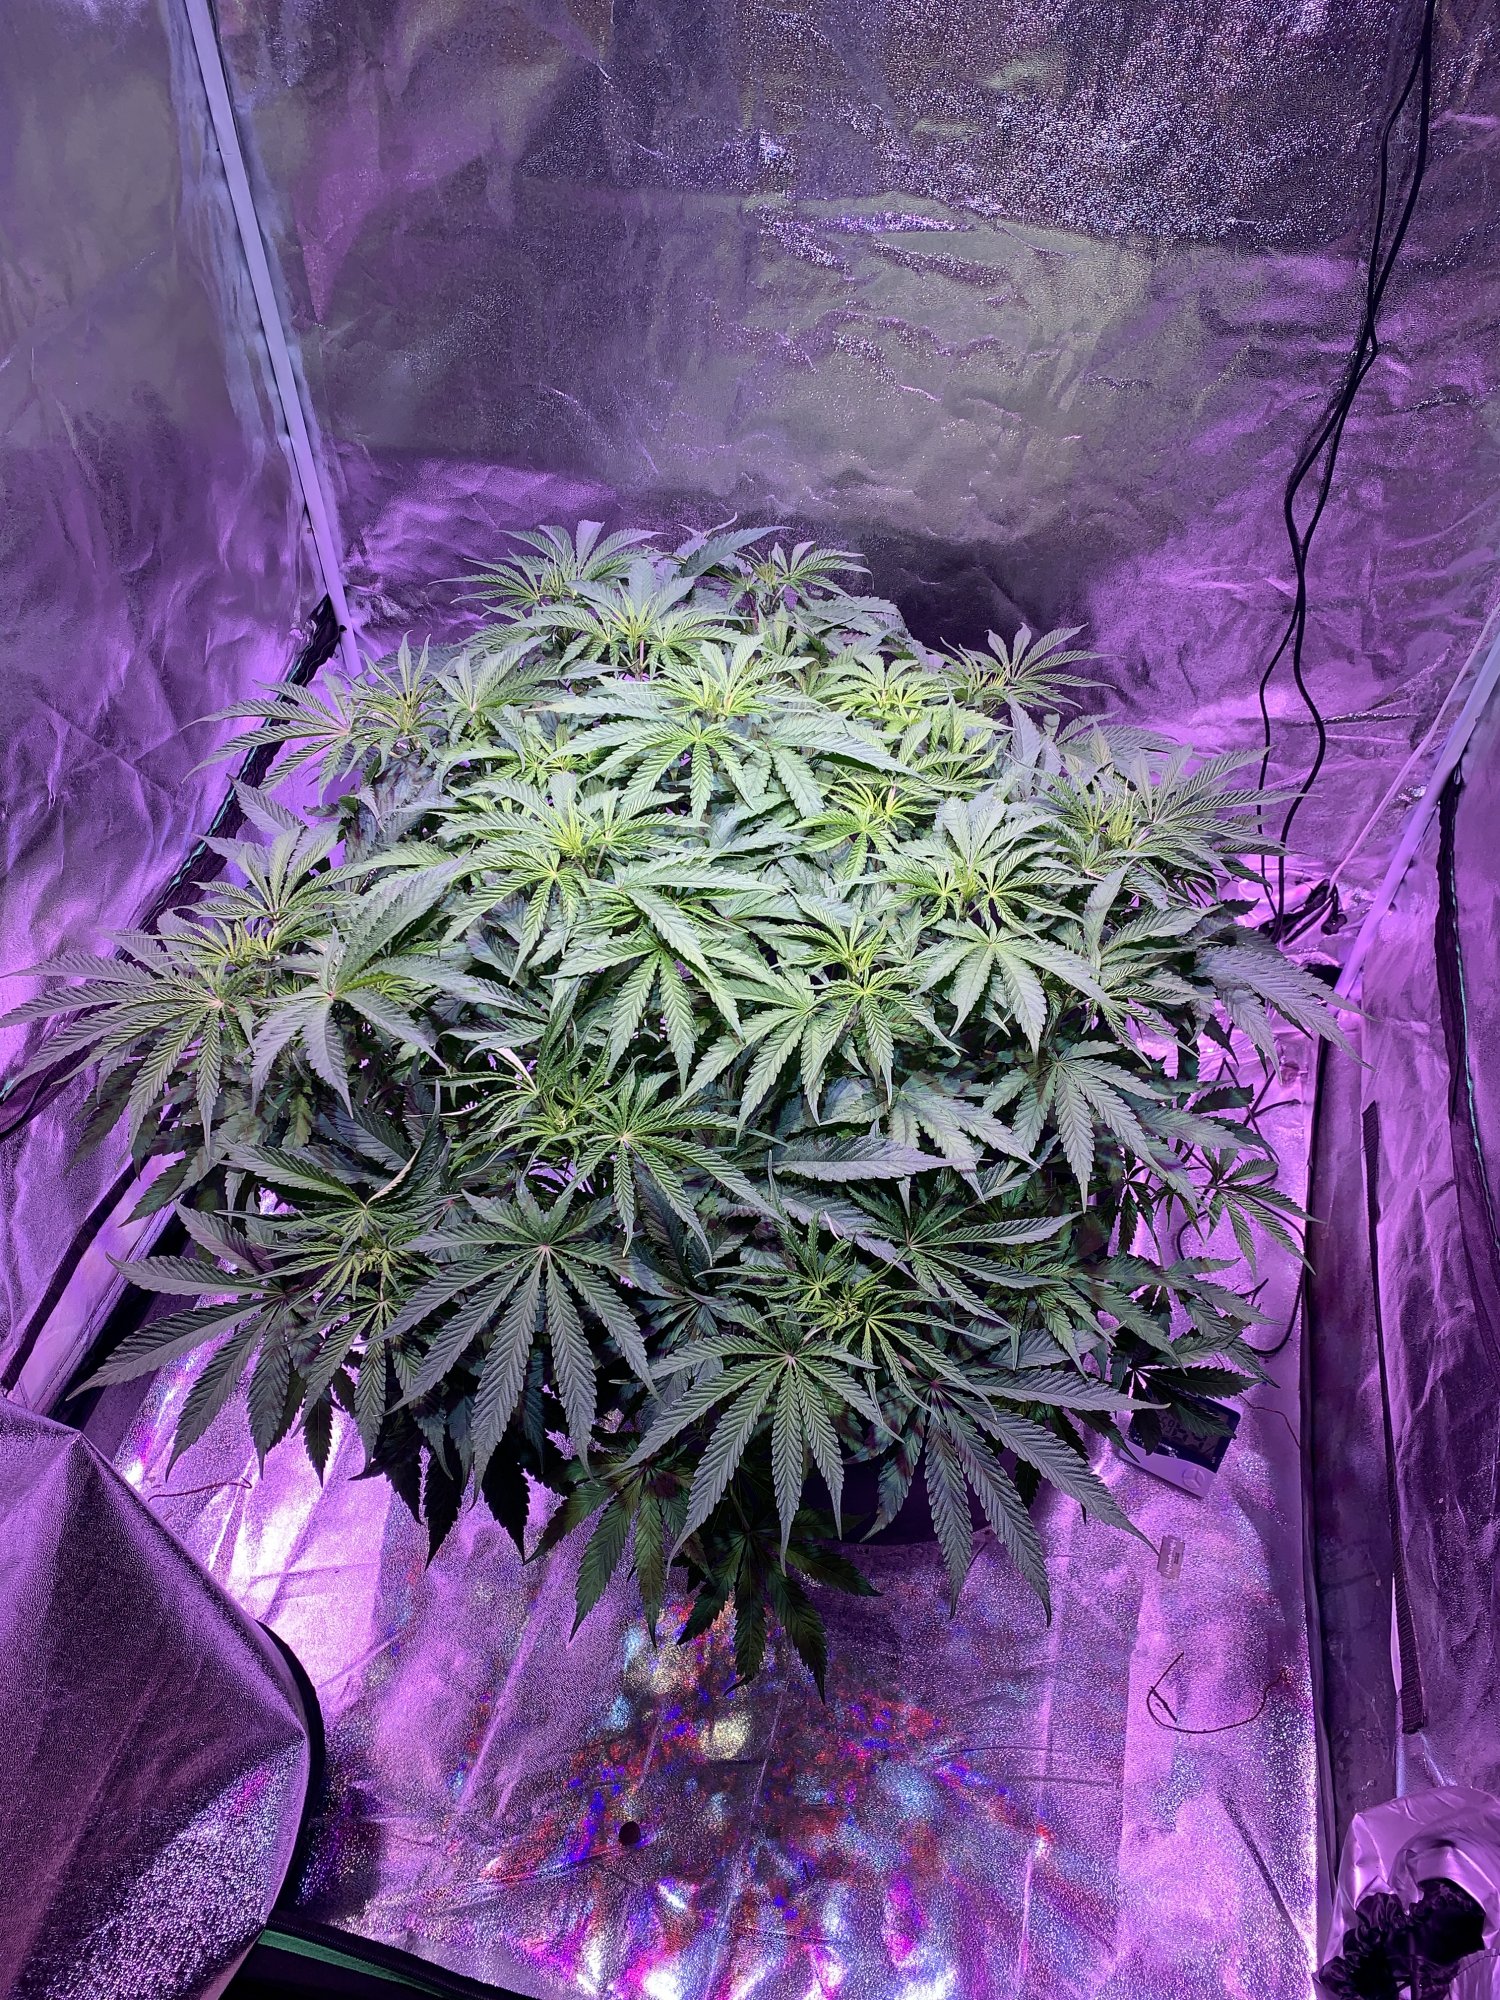 When to drop humidity for flower first grow